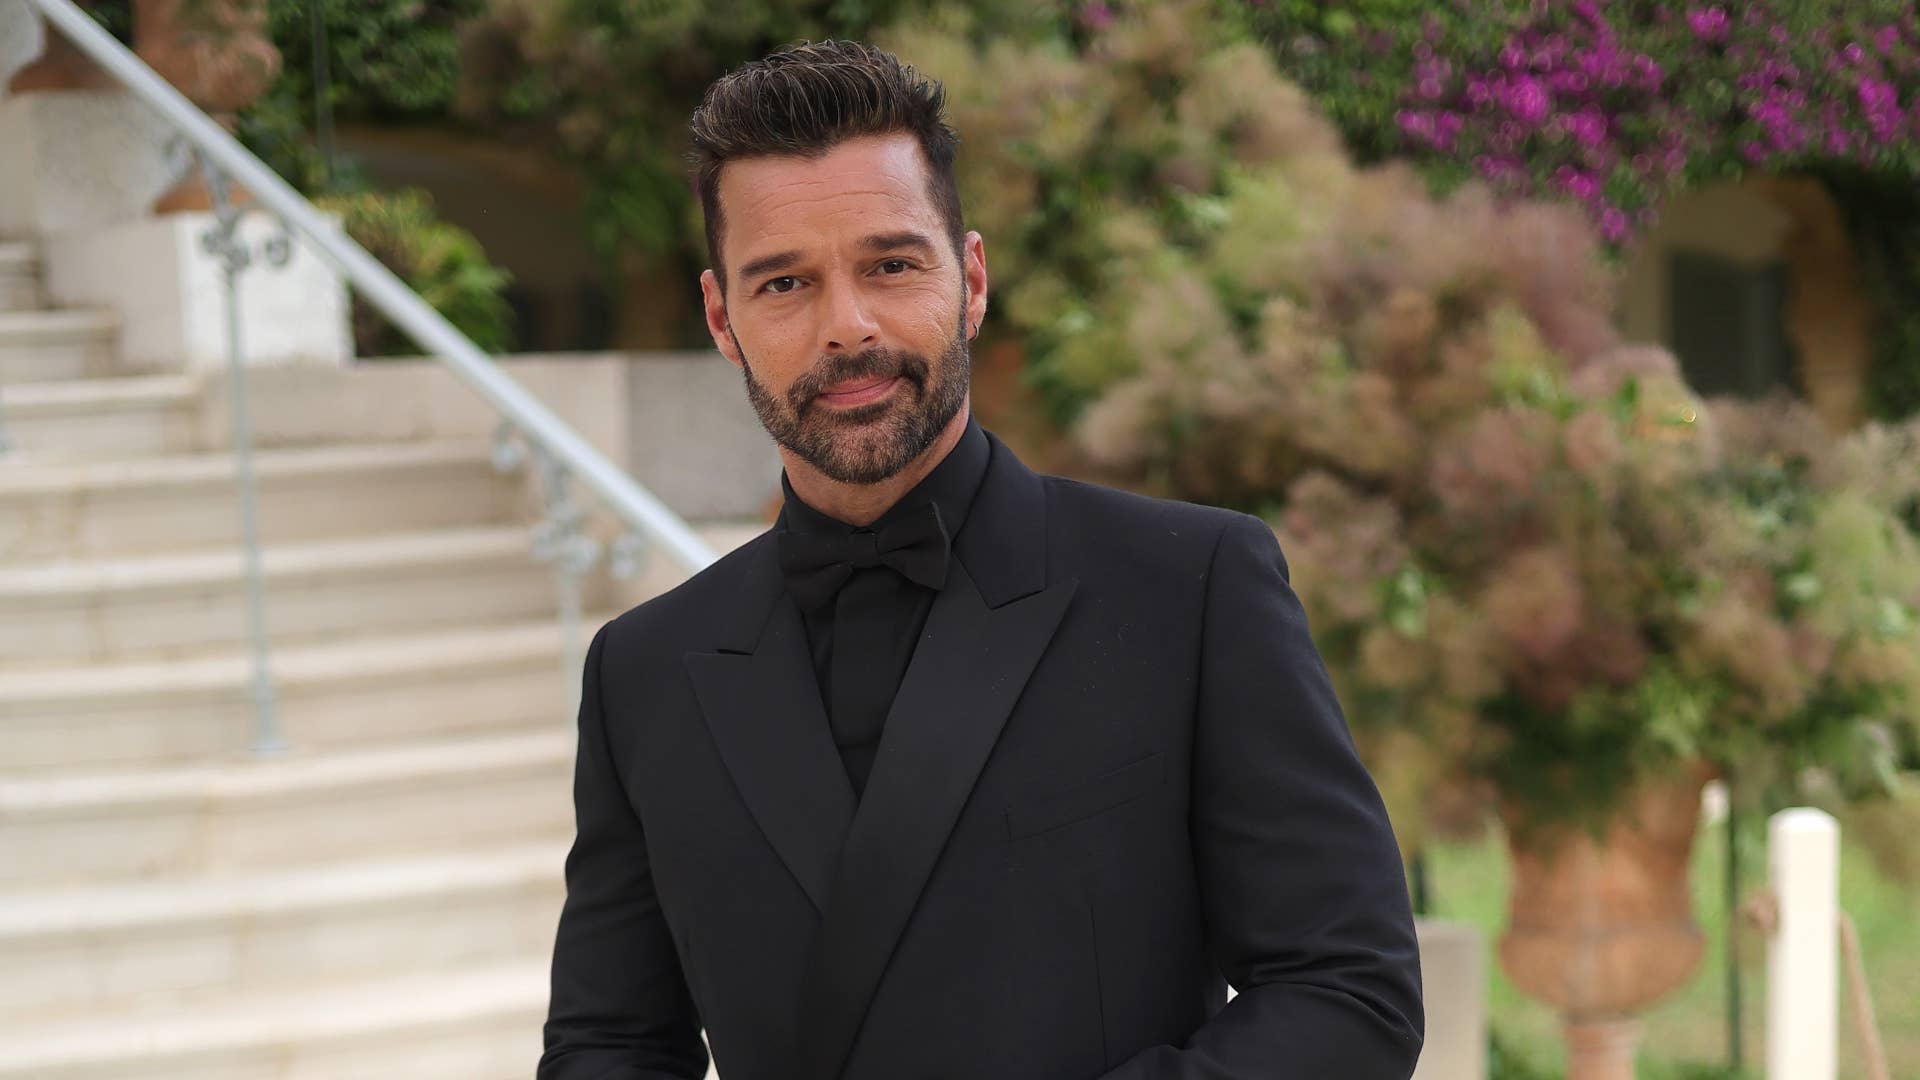 Ricky Martin is seen having his photo taken at an event